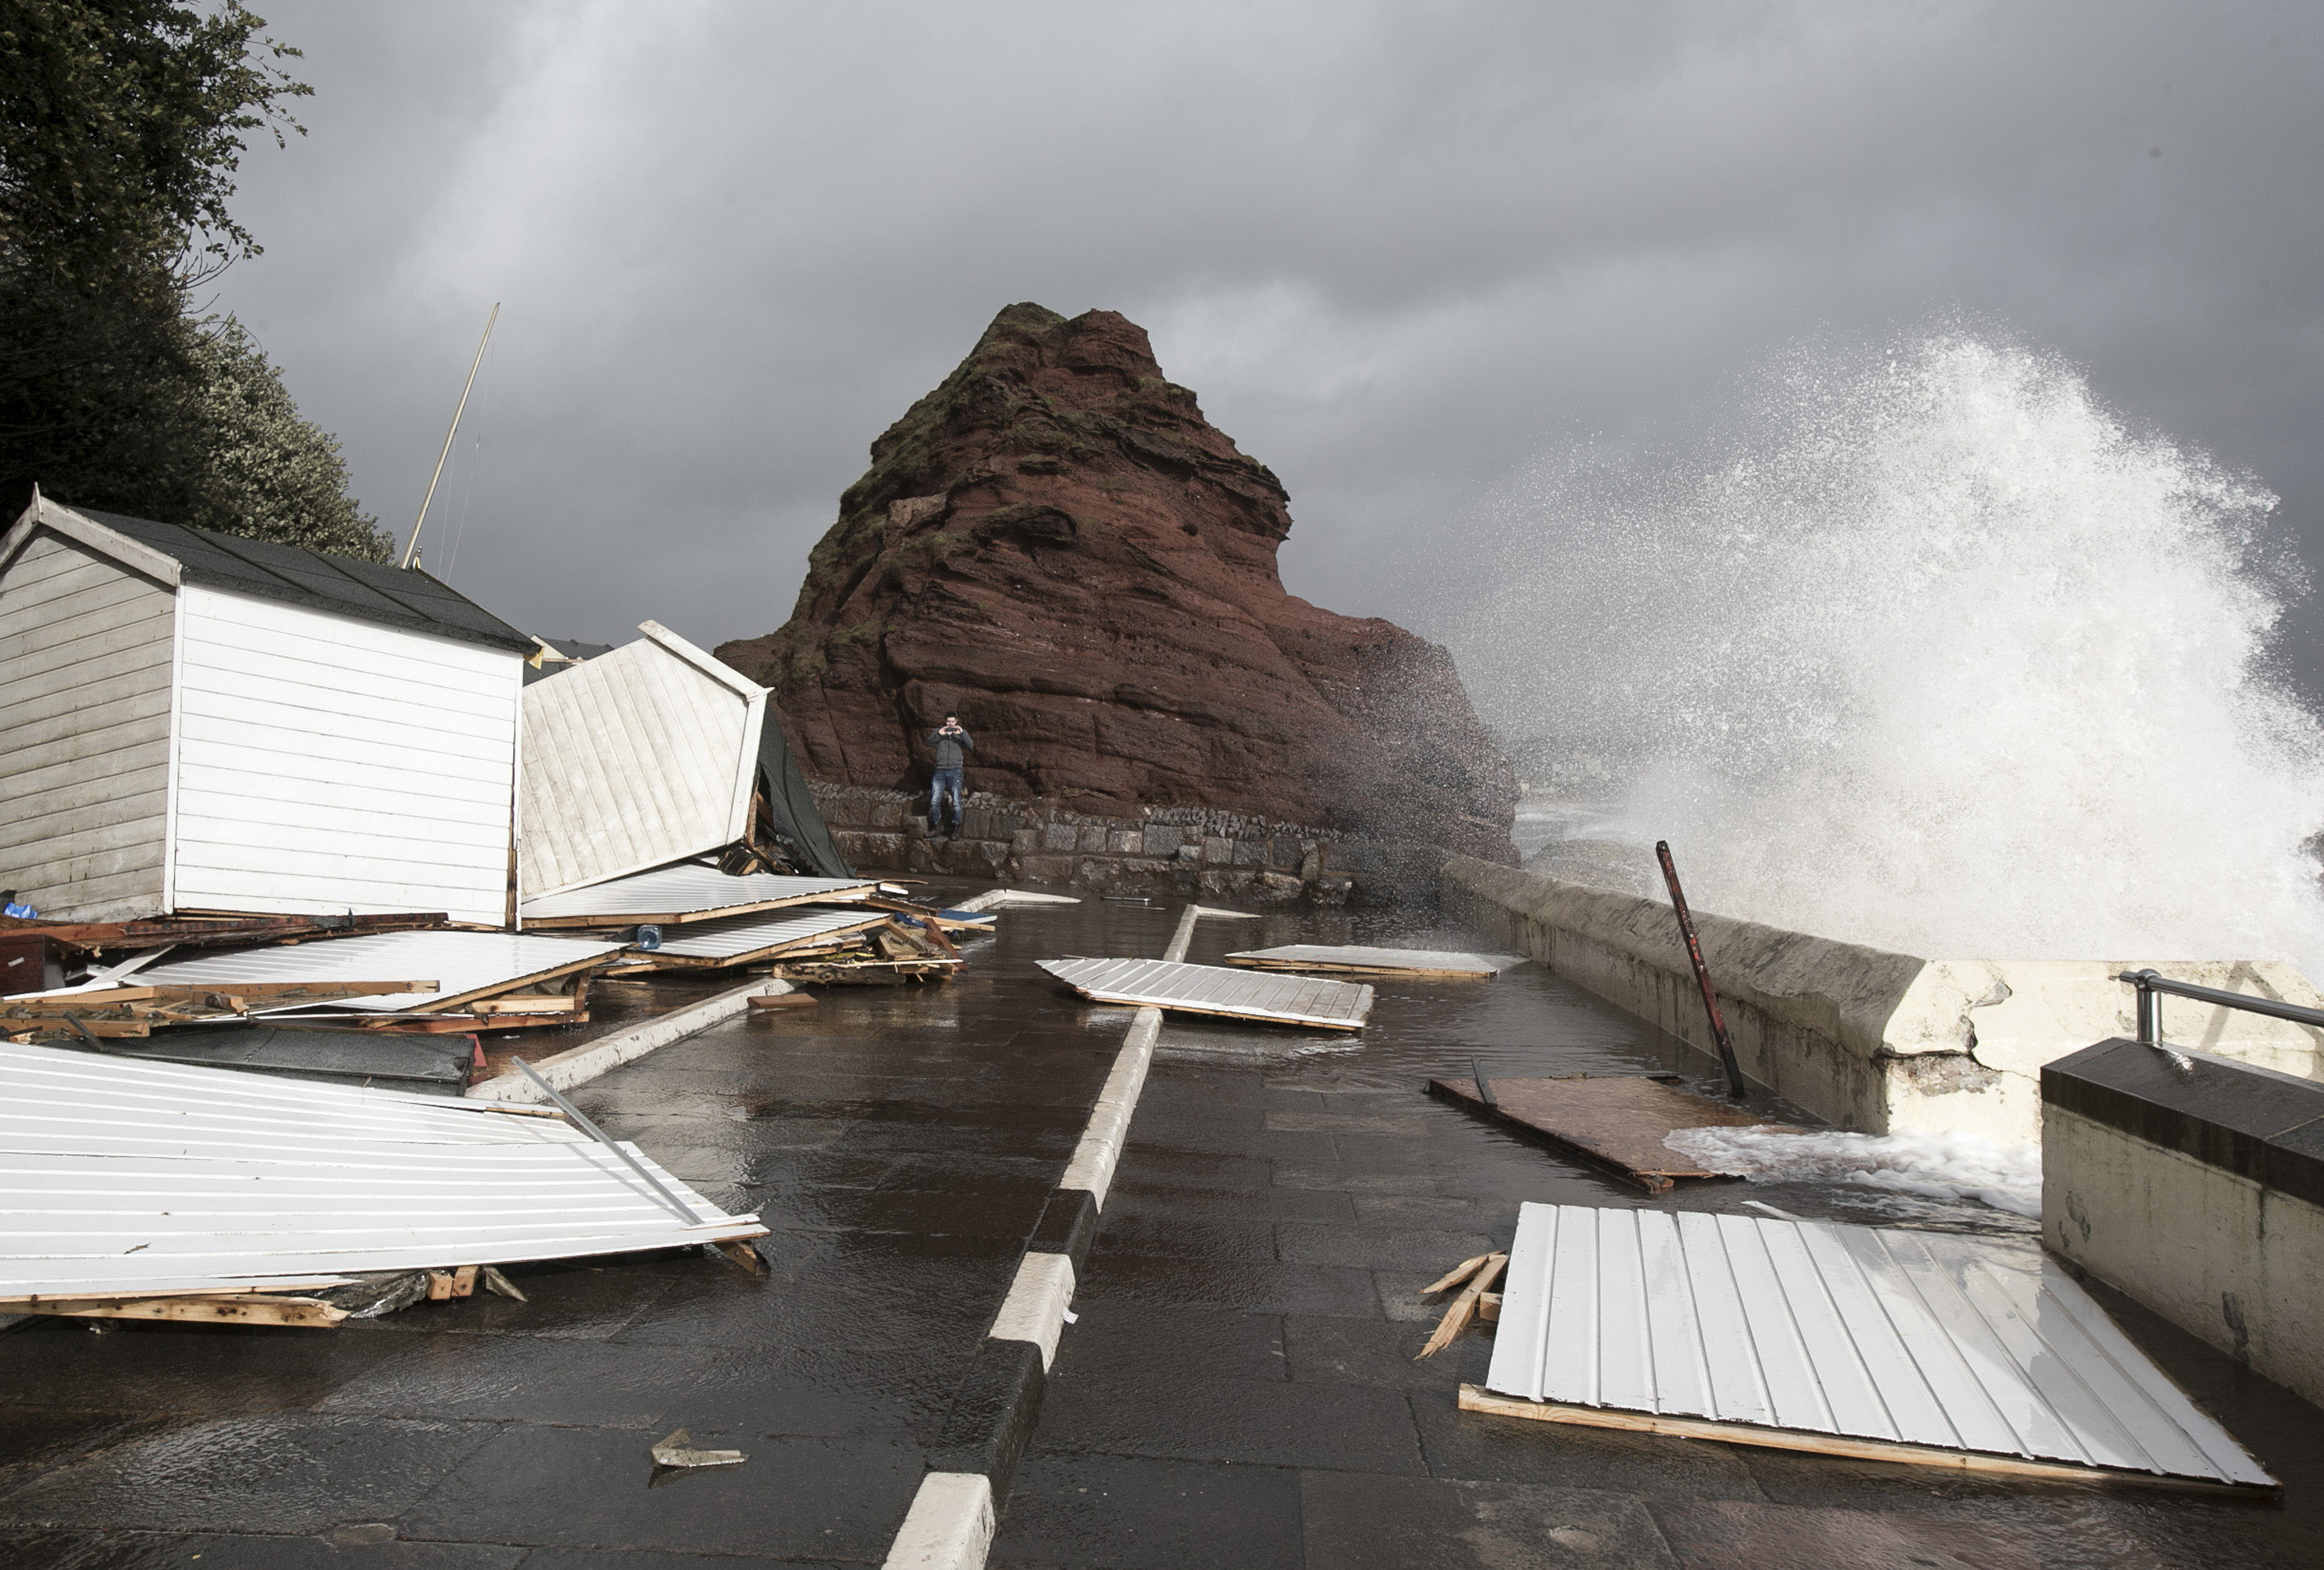 DAWLISH, UNITED KINGDOM - FEBRUARY 05:A man takes a photograph of some of the beach huts that have been damaged by the storm waves at Dawlish on February 5, 2014 in Devon, England. With high 